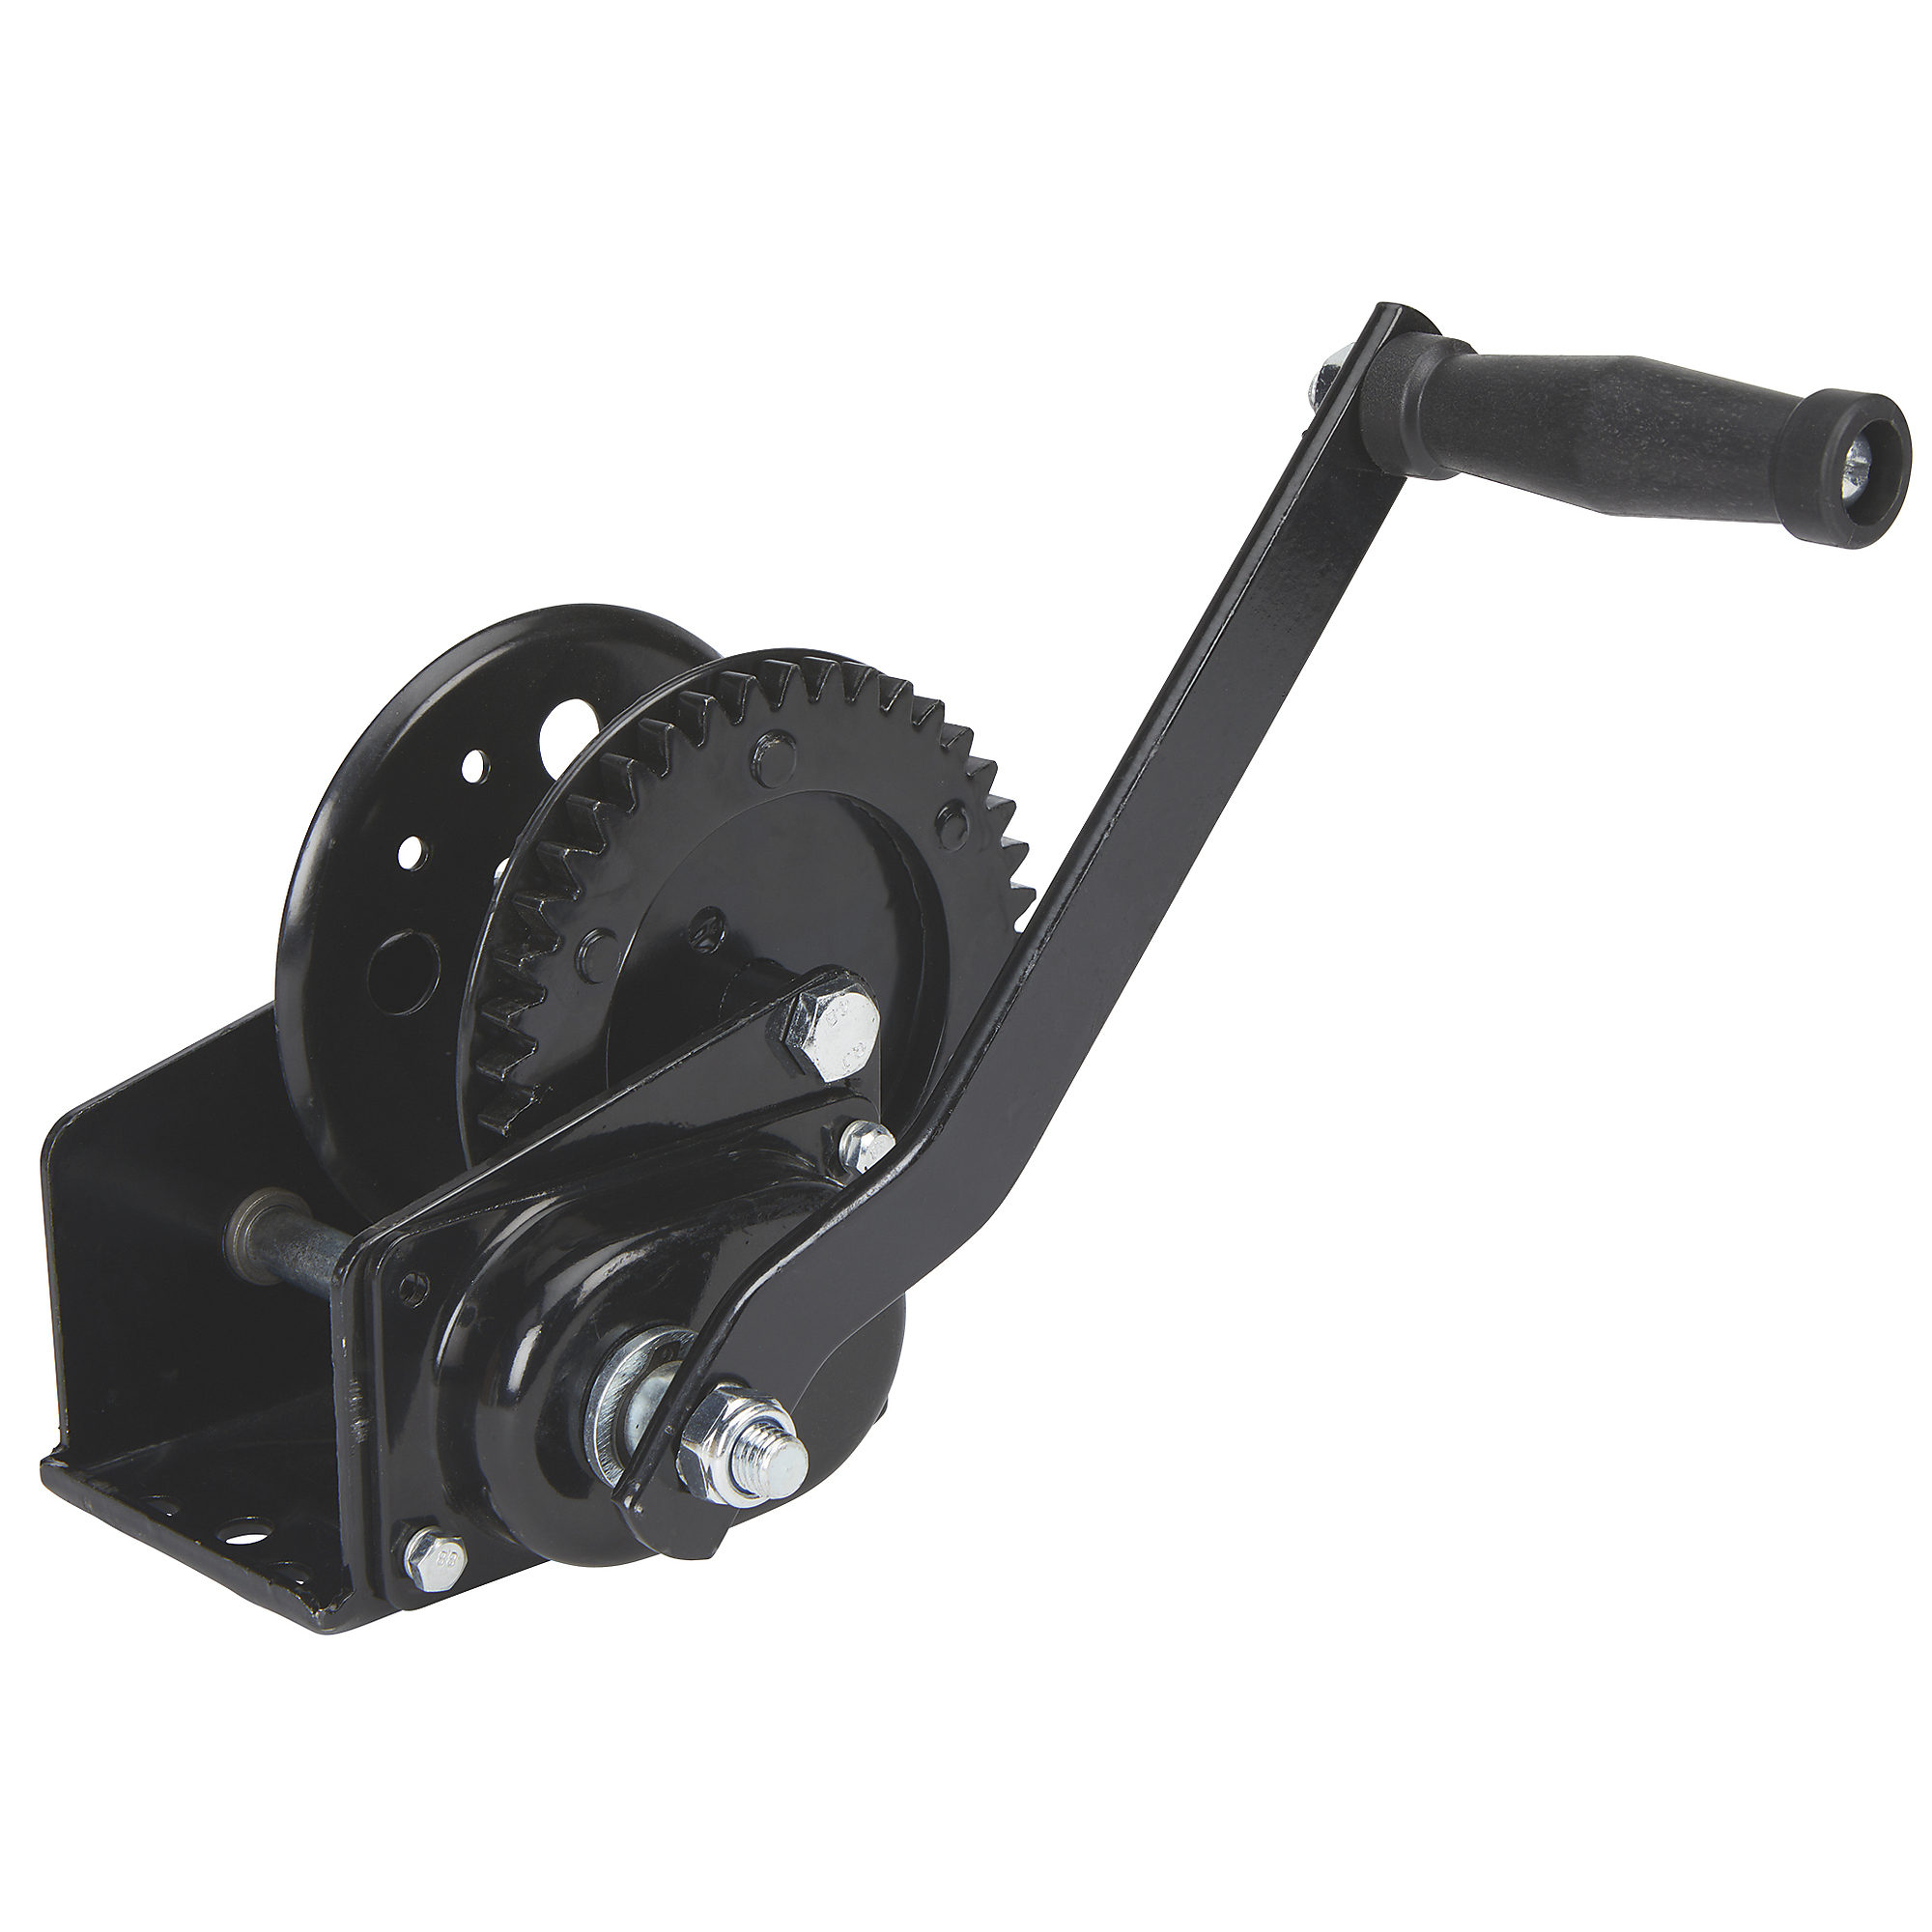 Ultra-Tow Single Speed Hand Winch with Automatic Brake, 1600-Lb. Load Capacity, Model SC1600